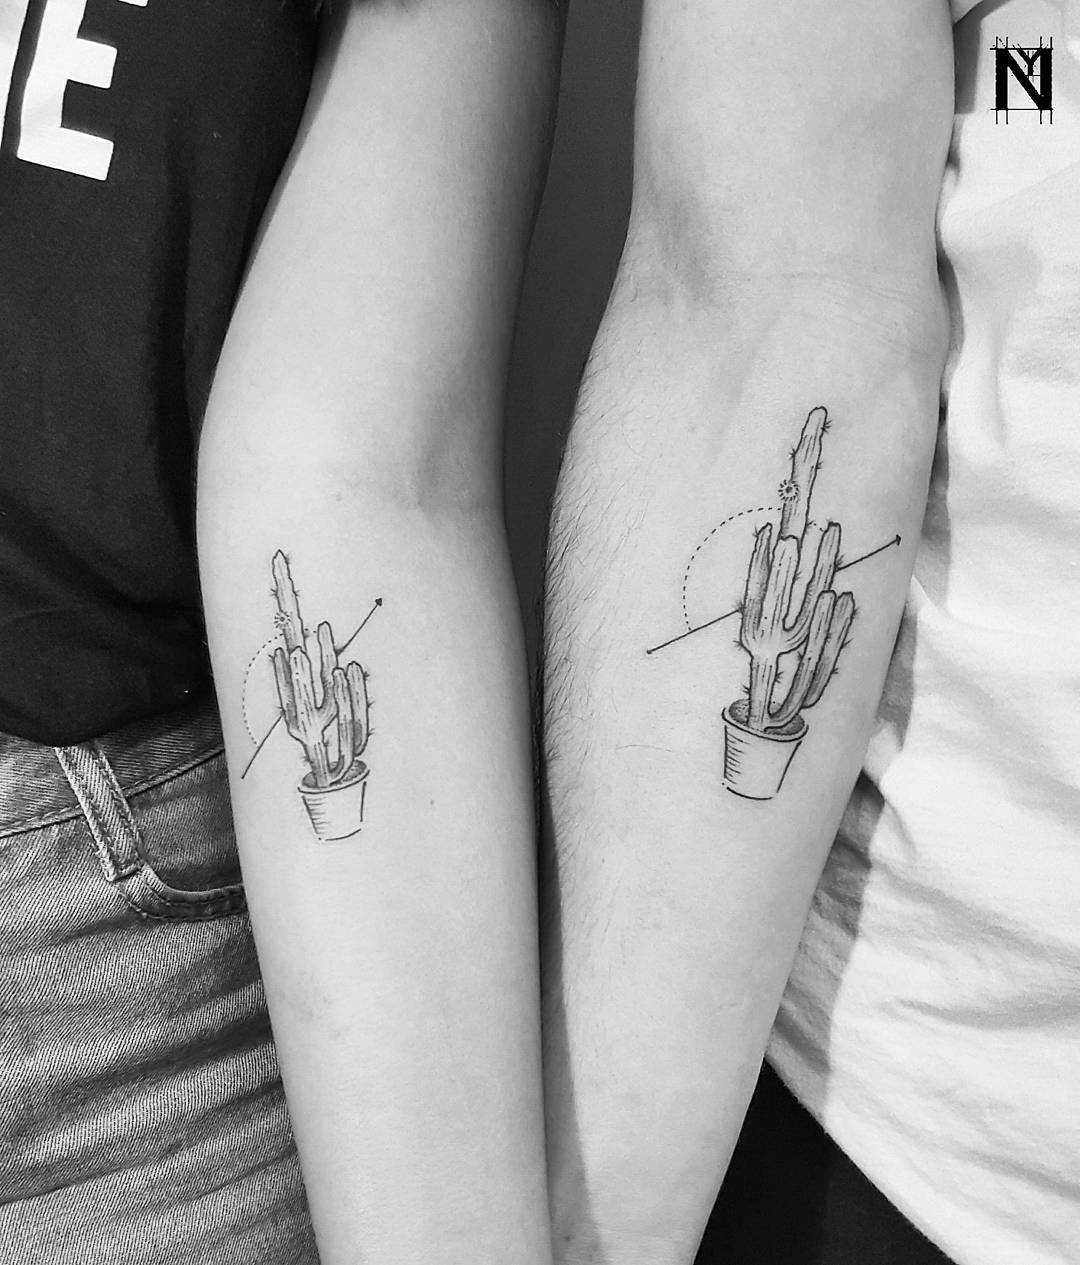 Matching cacti tattoos on forearms